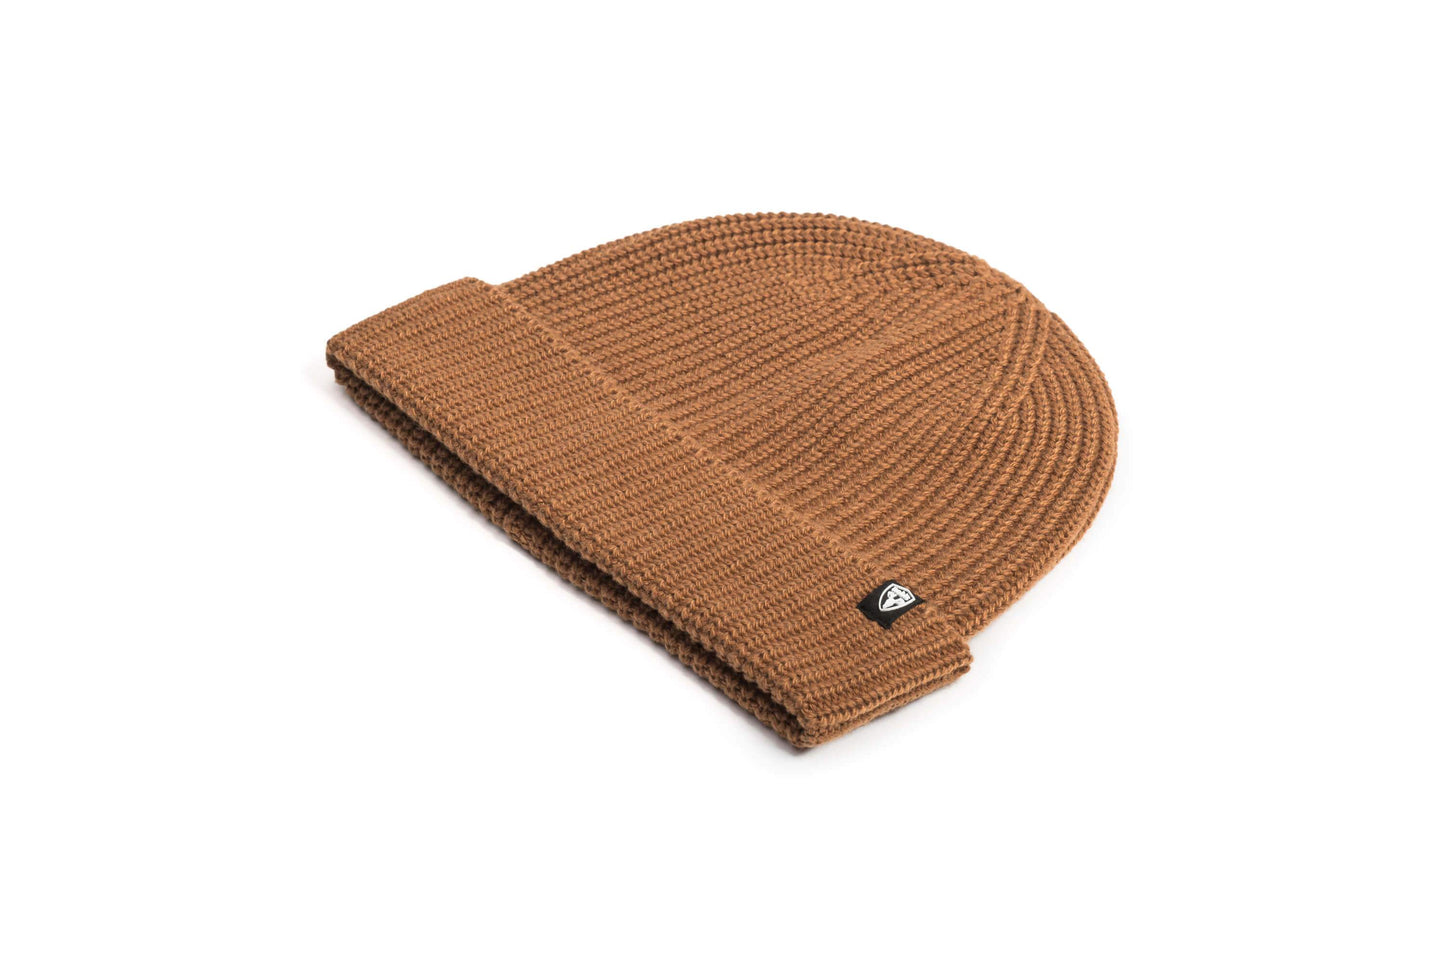 Elain Unisex Knit Toque in ribbed fabric, and Nobis label on cuff, in Cognac